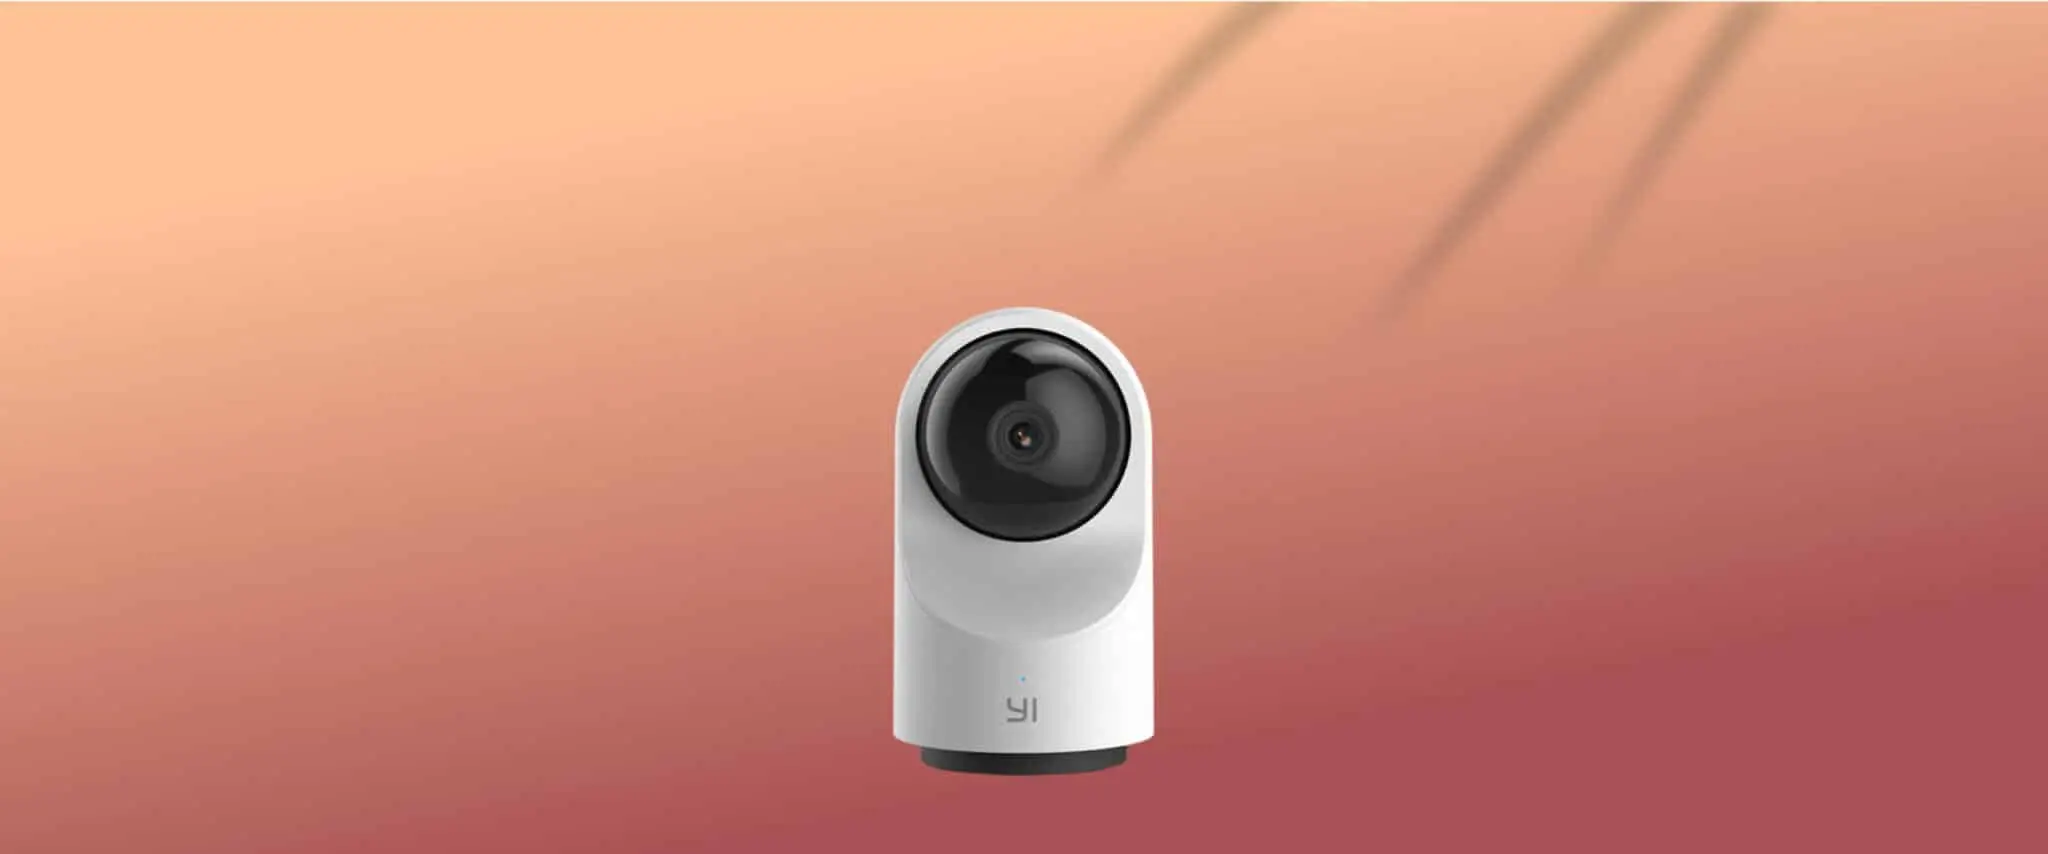 Yi Dome Camera X: Keep an Eye on every Motion in every house!